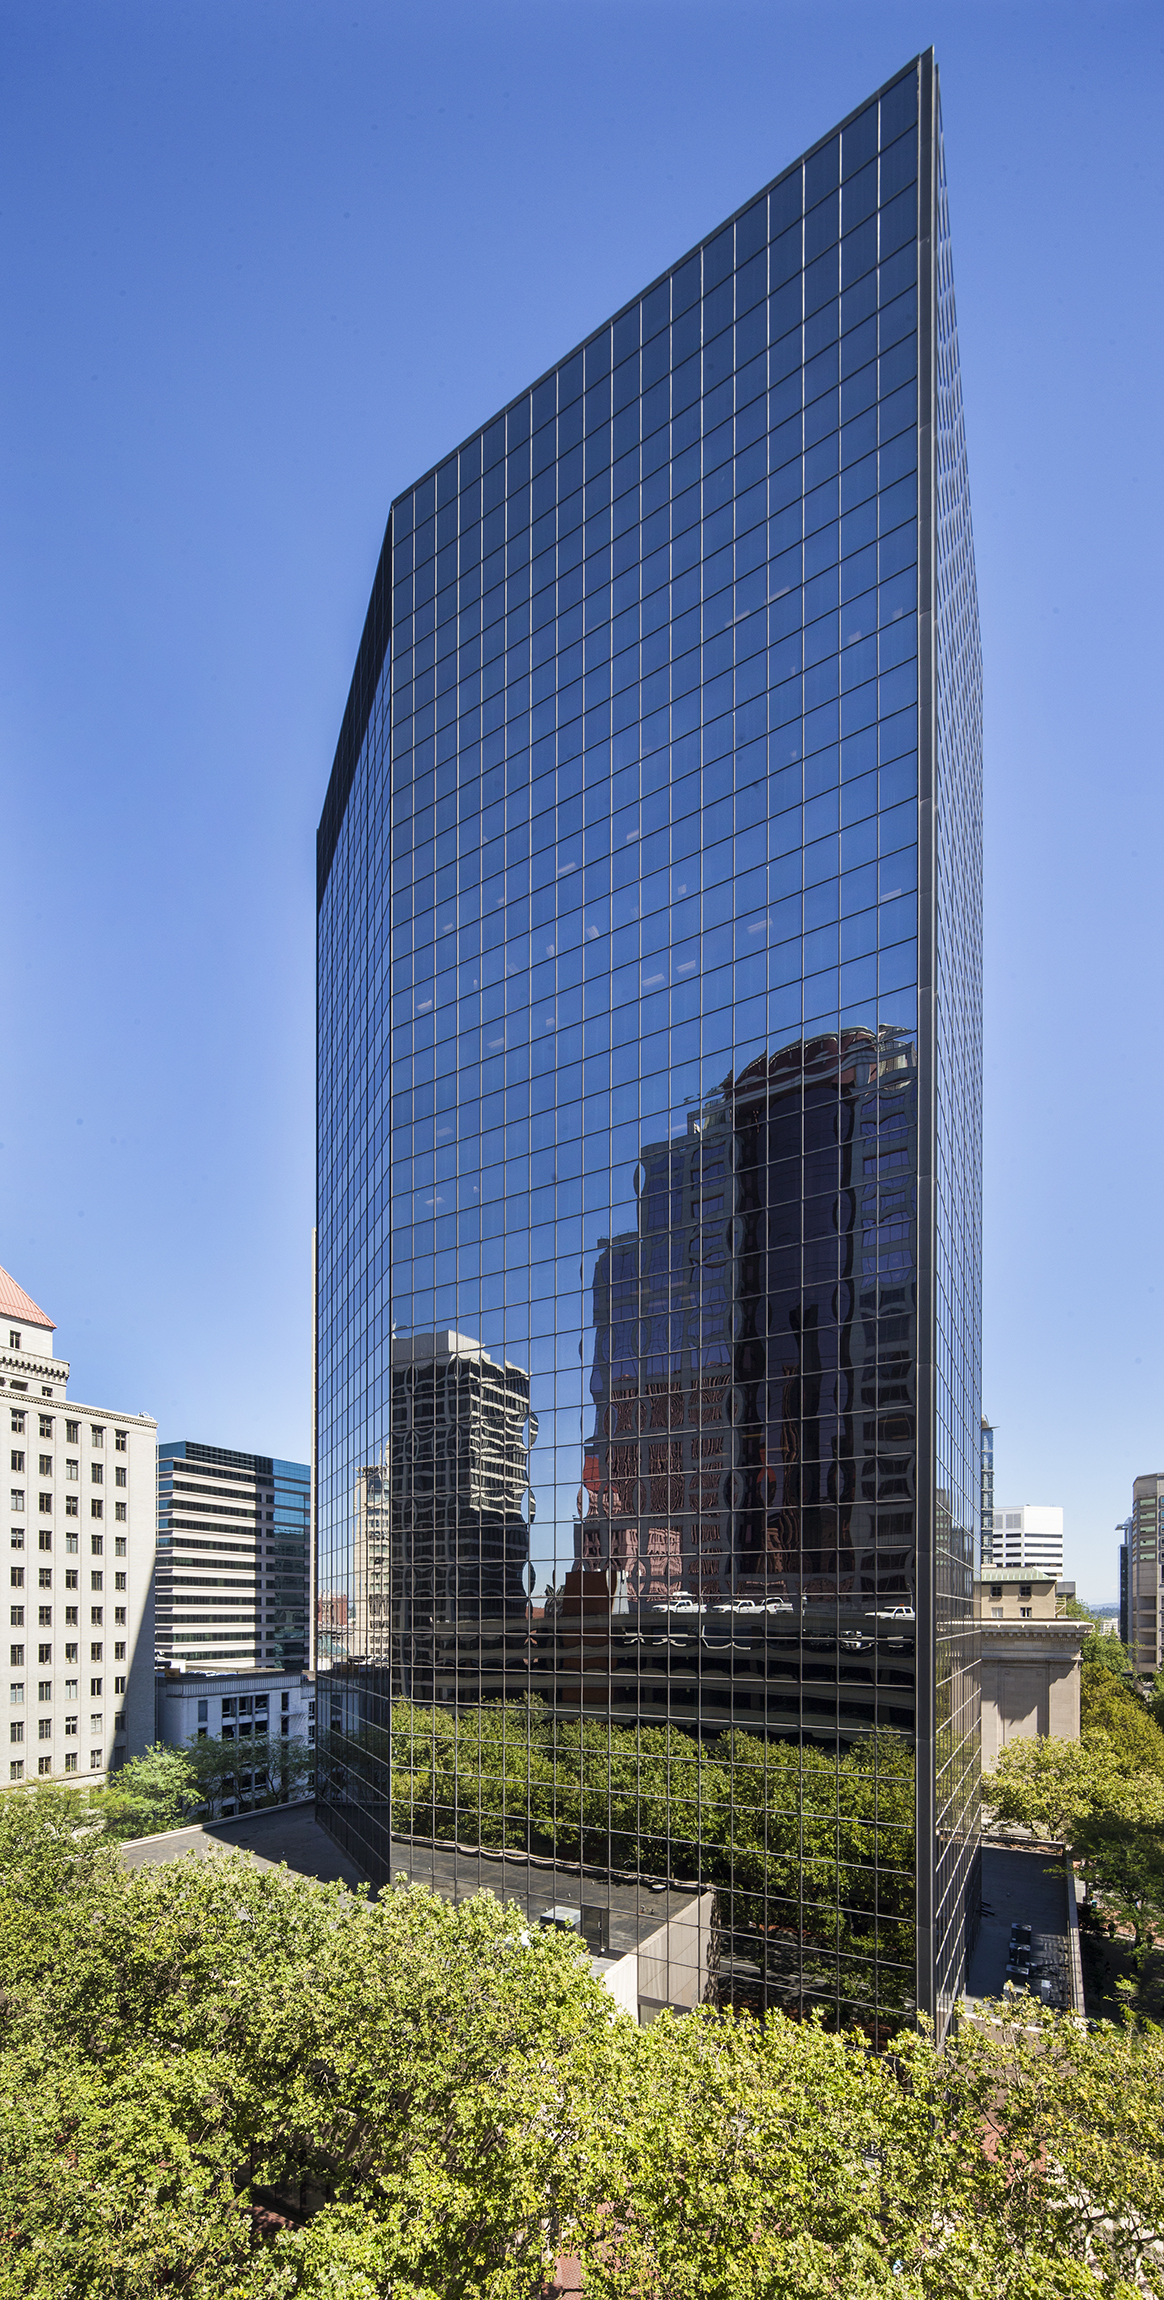 Congress Center consists of a 23-story LEED-EB Gold high-rise office tower in downtown Portland.